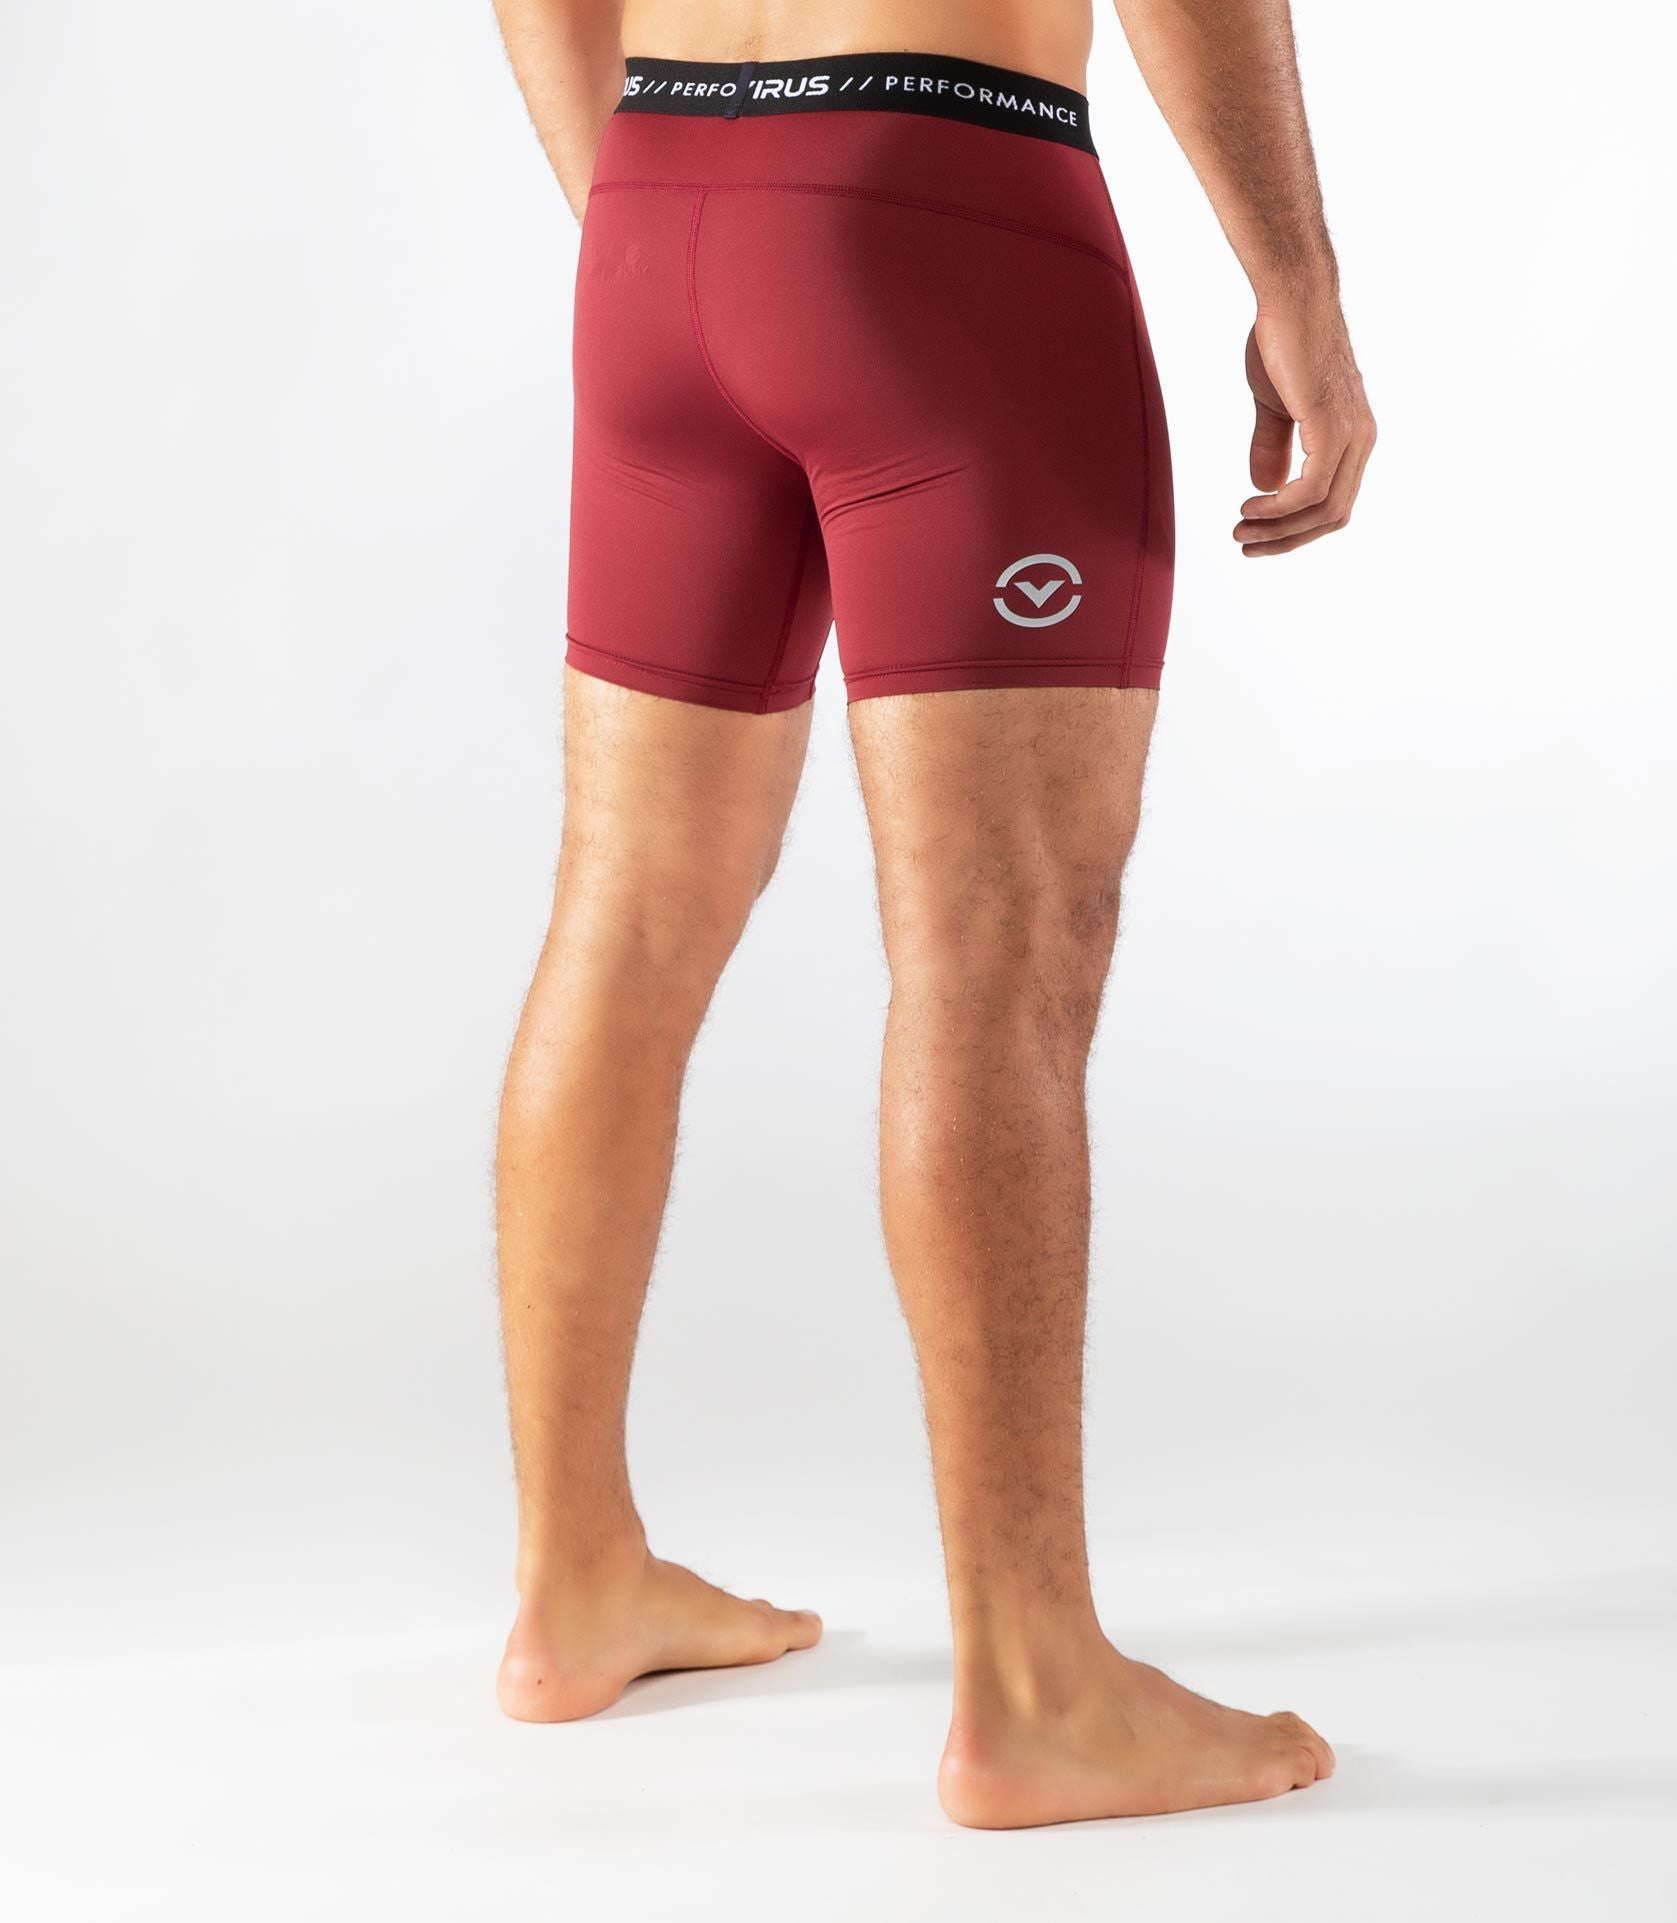 Virus | CO36 Phoenix Stay Cool Compression Shorts - XTC Fitness - Exercise Equipment Superstore - Canada - Shorts